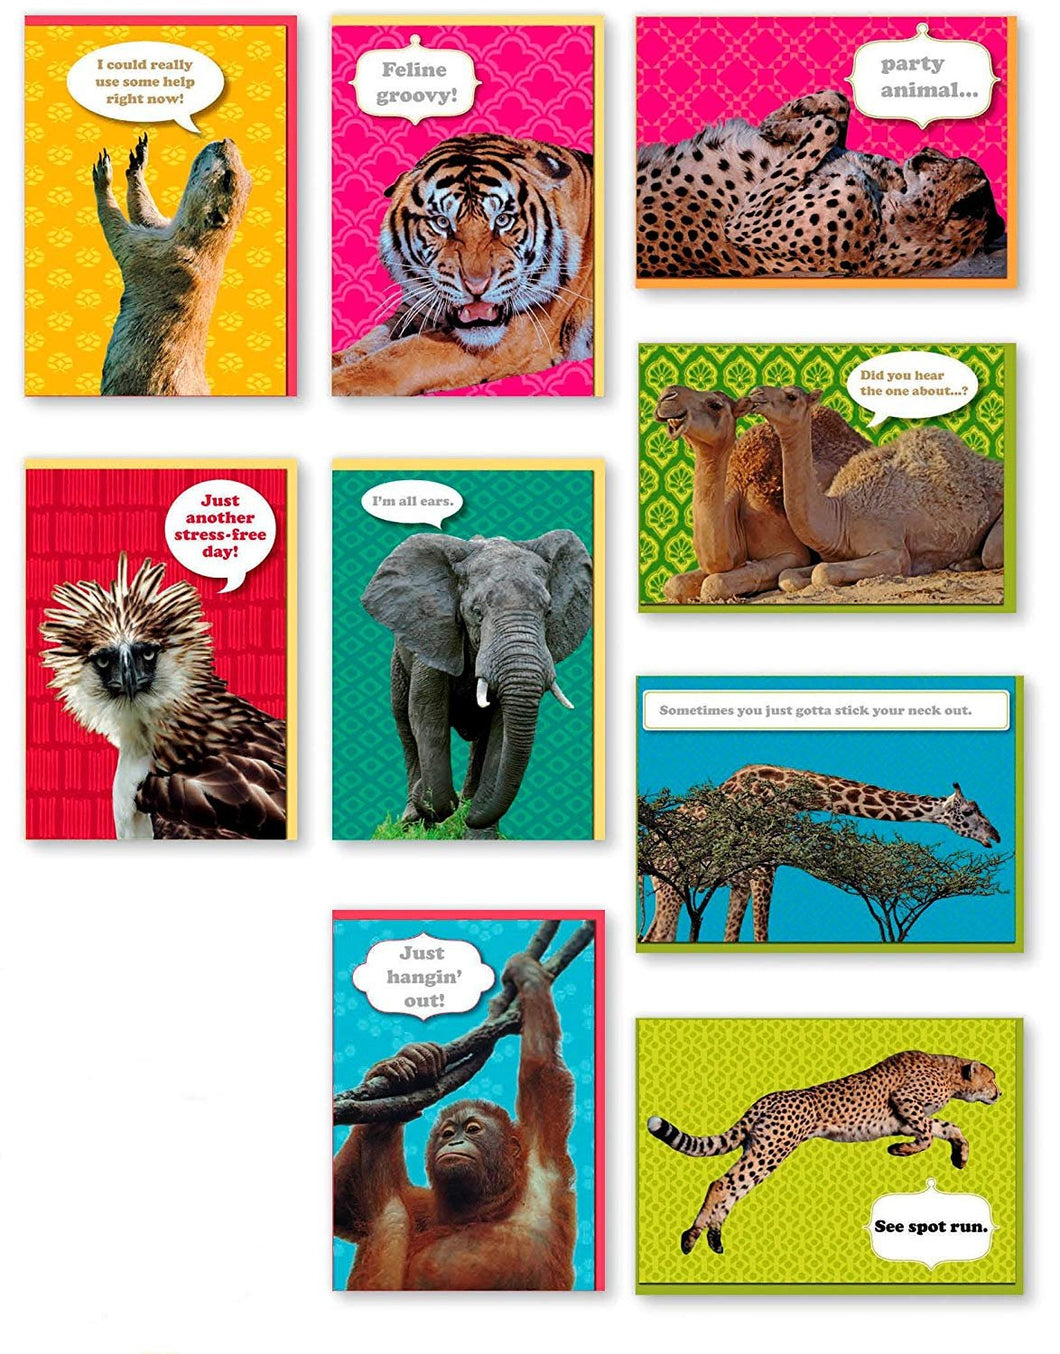 Assorted 9-Pack Animal Box Set All Occasion National Geographic Greeting Cards Bulk with Tiger, Elephant, Giraffe, Cheetah, Monkey & More for Her for Him